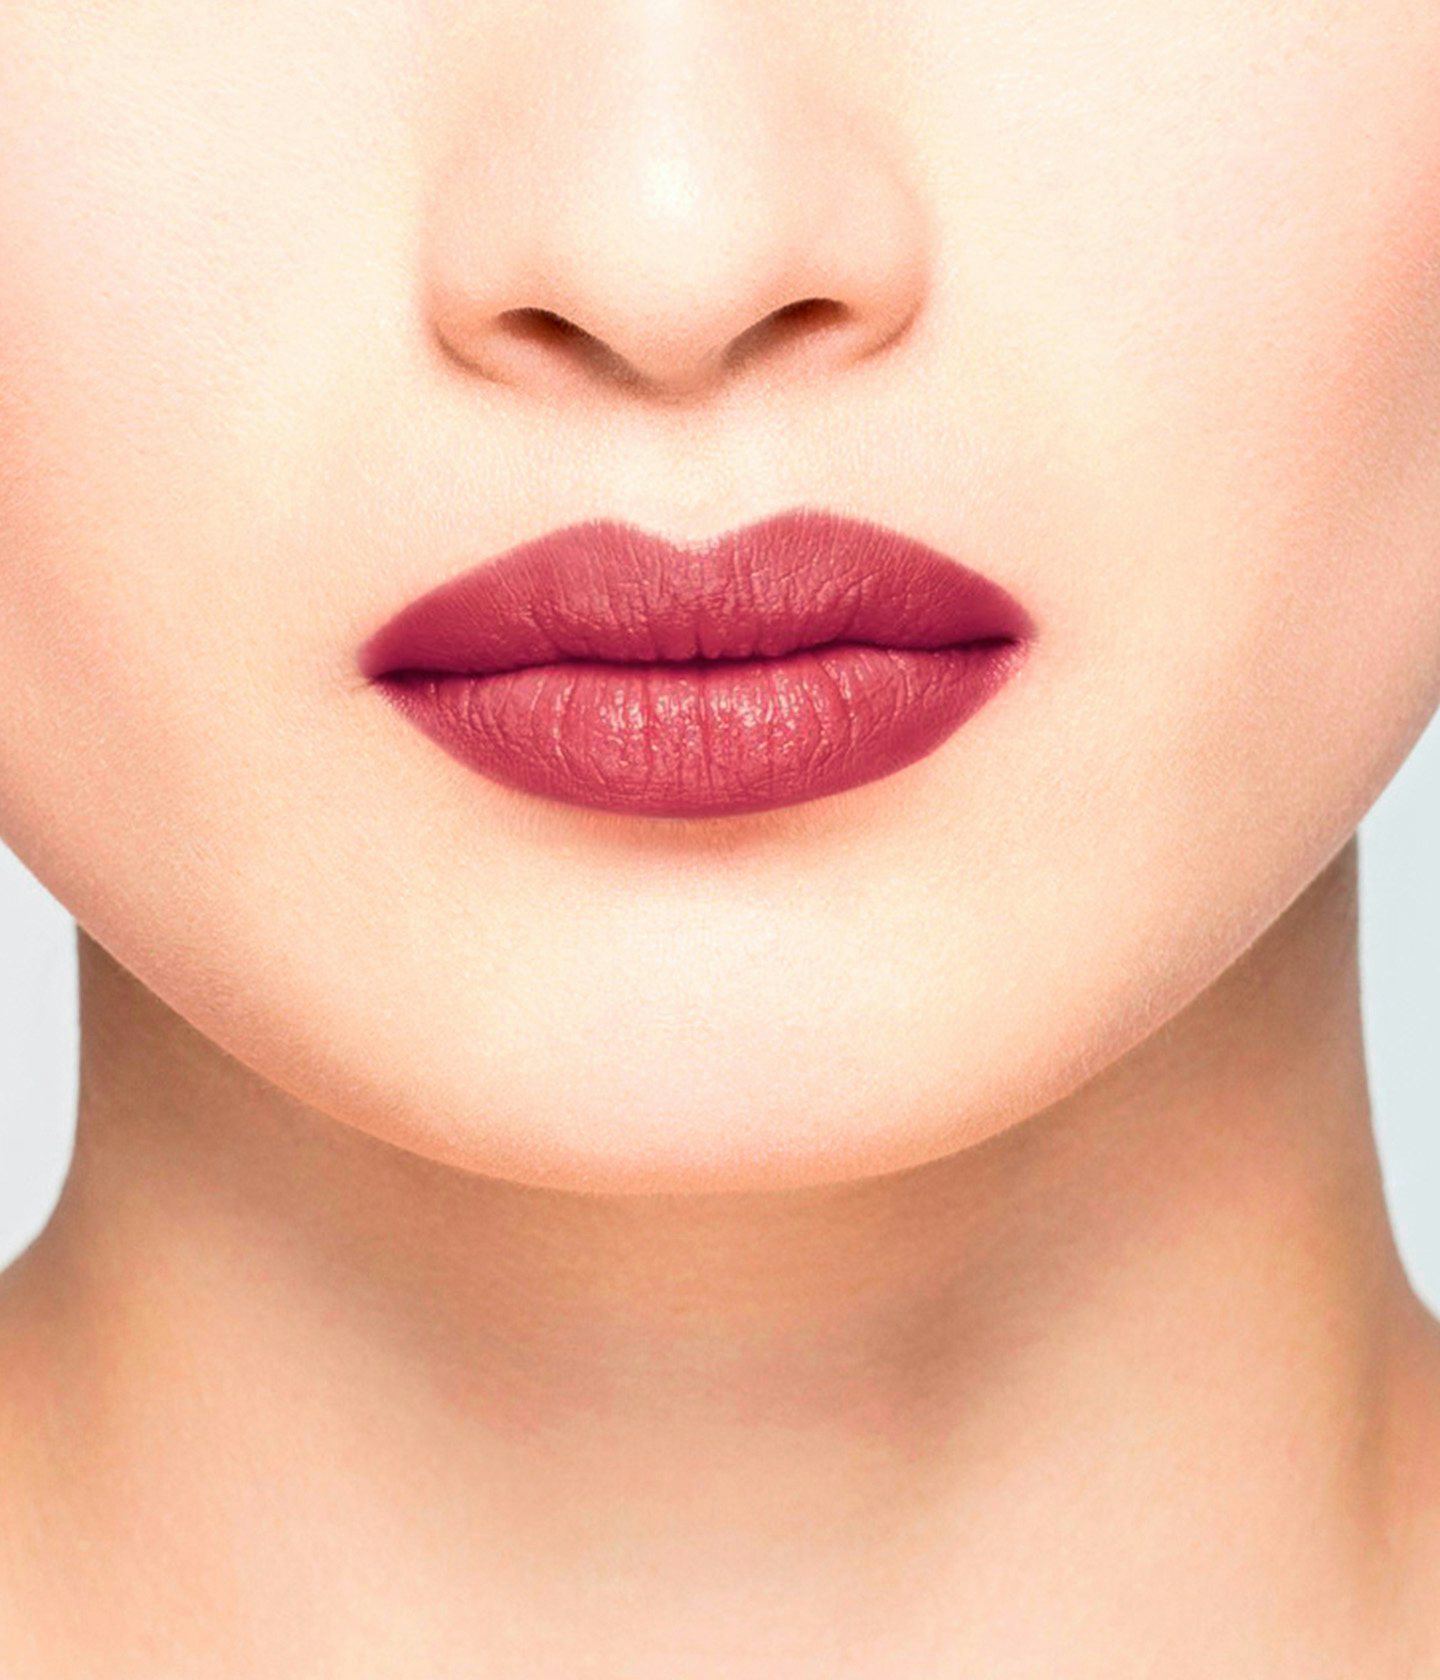 La bouche rouge Le Baume Kelly shade on the lips of an Asian model